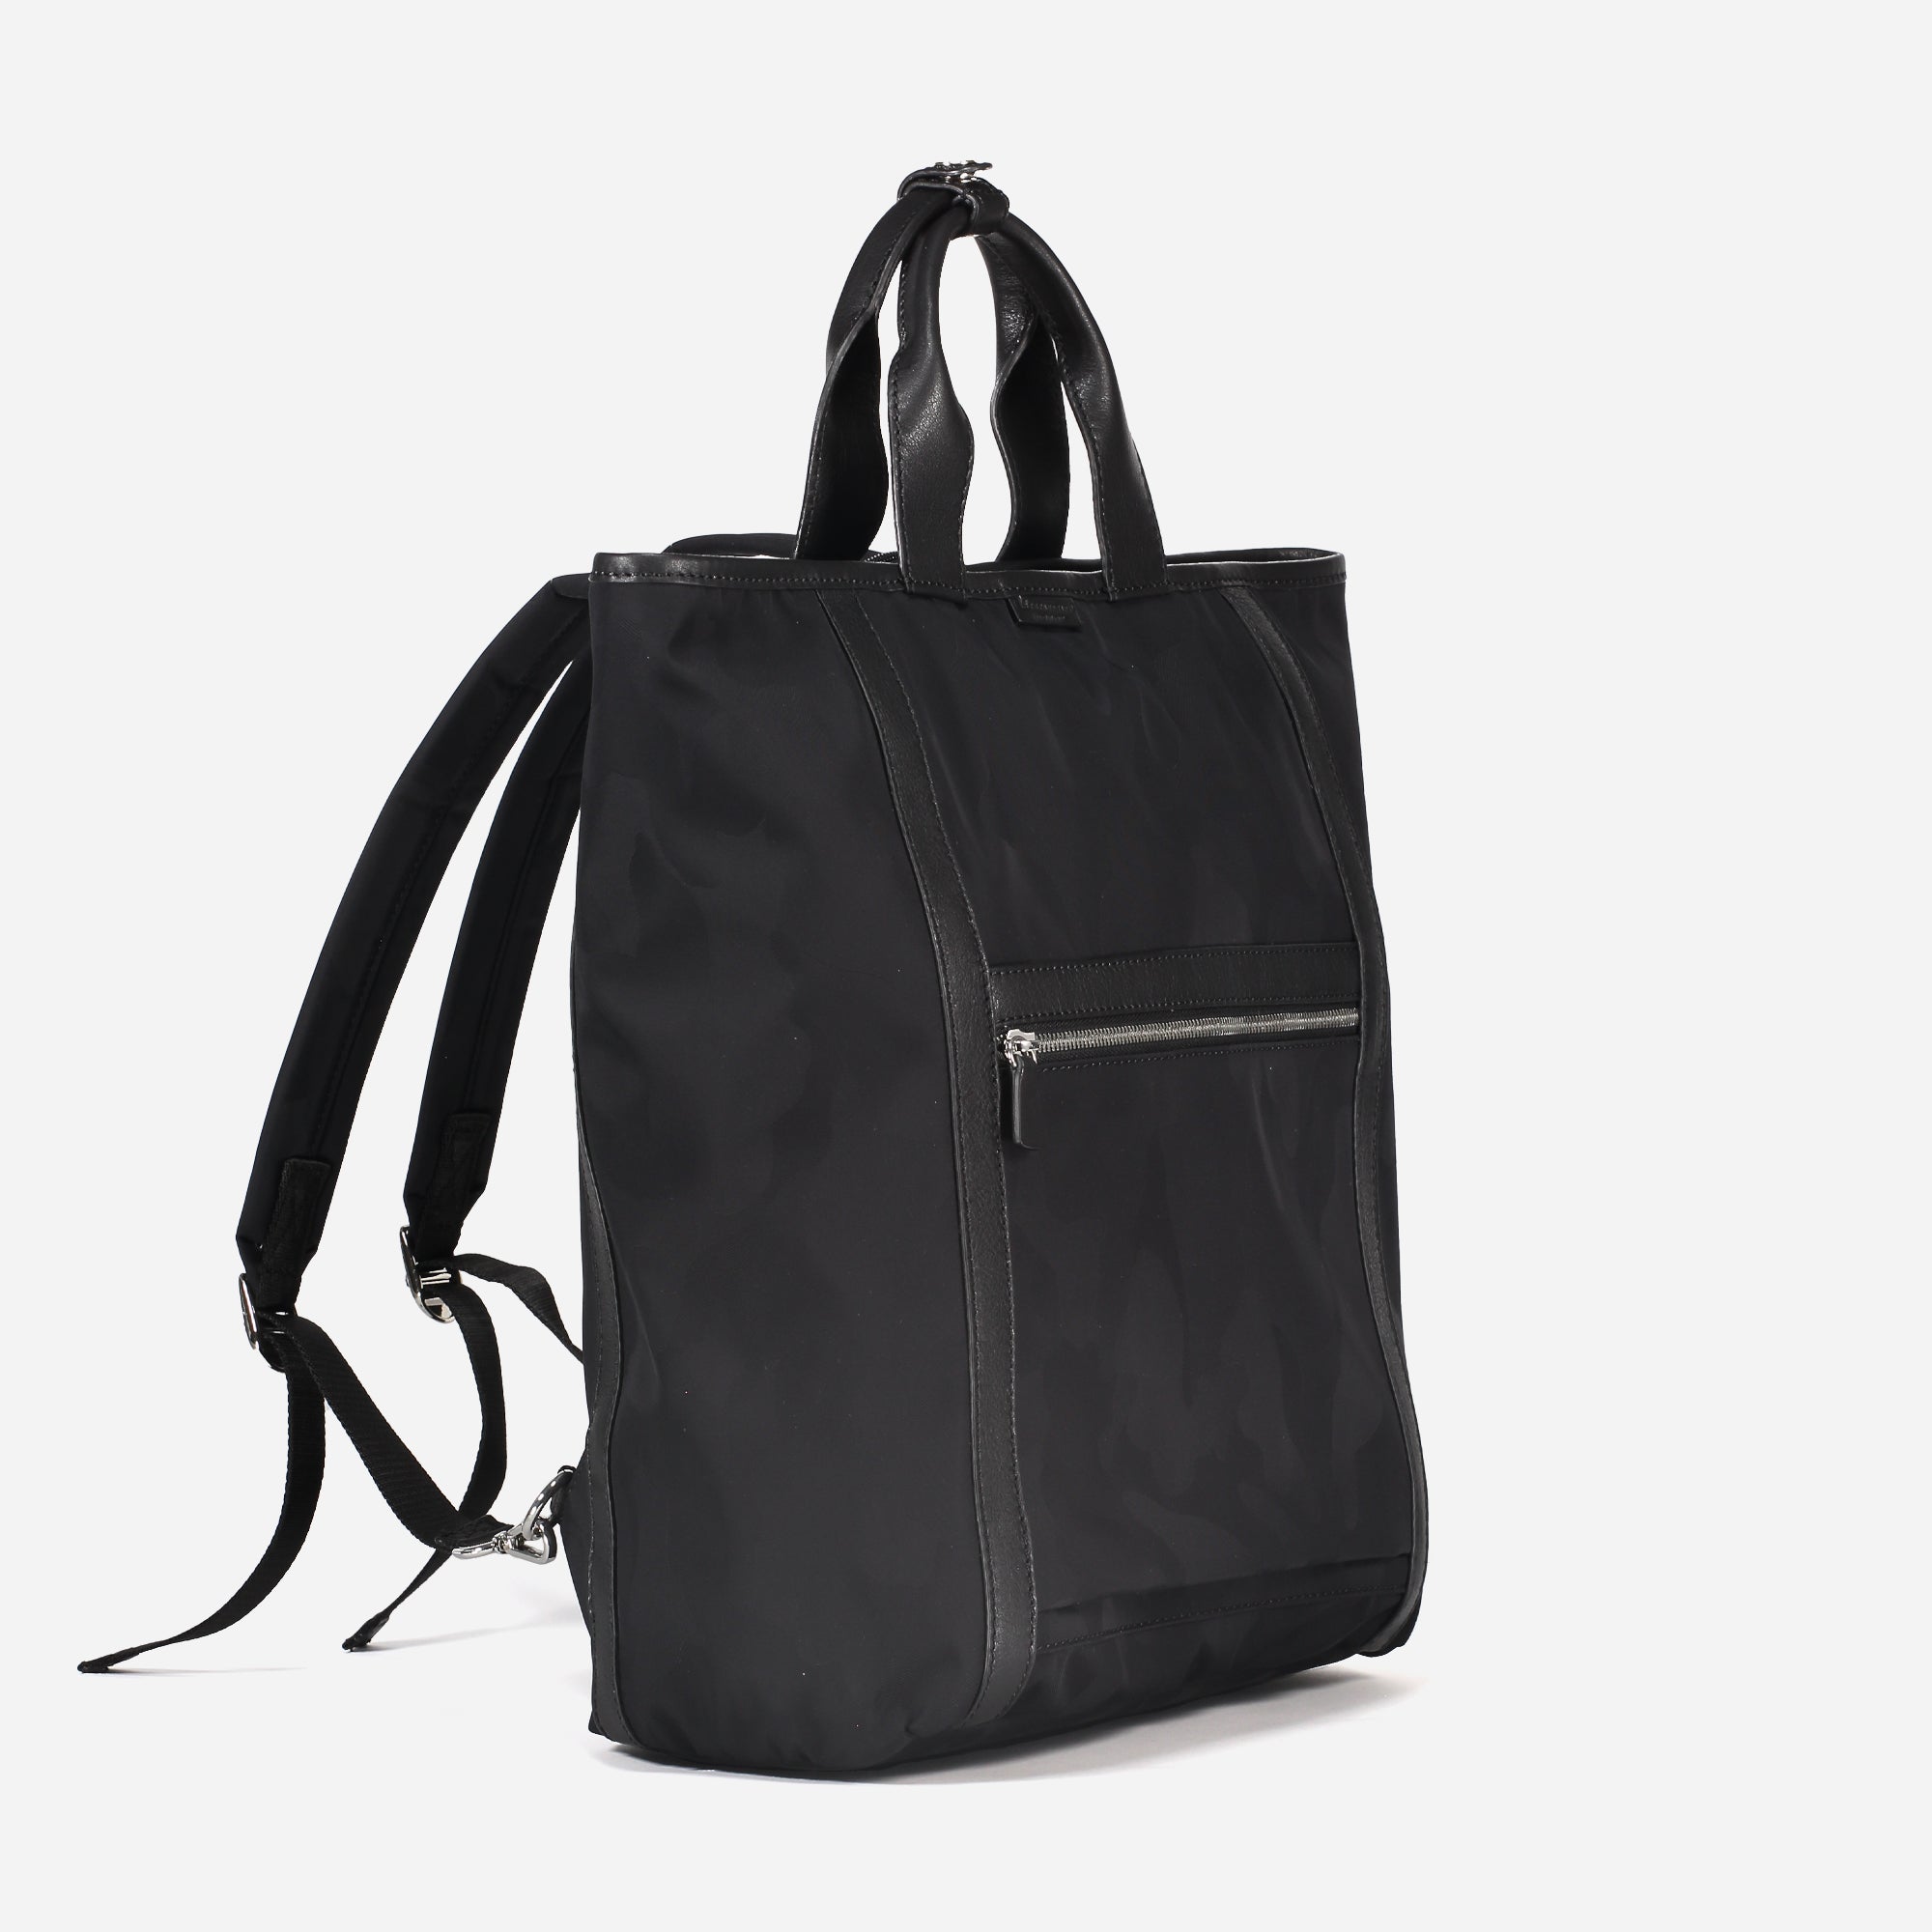 335 – BACKPACK<br> Nylon and Calfskin leather